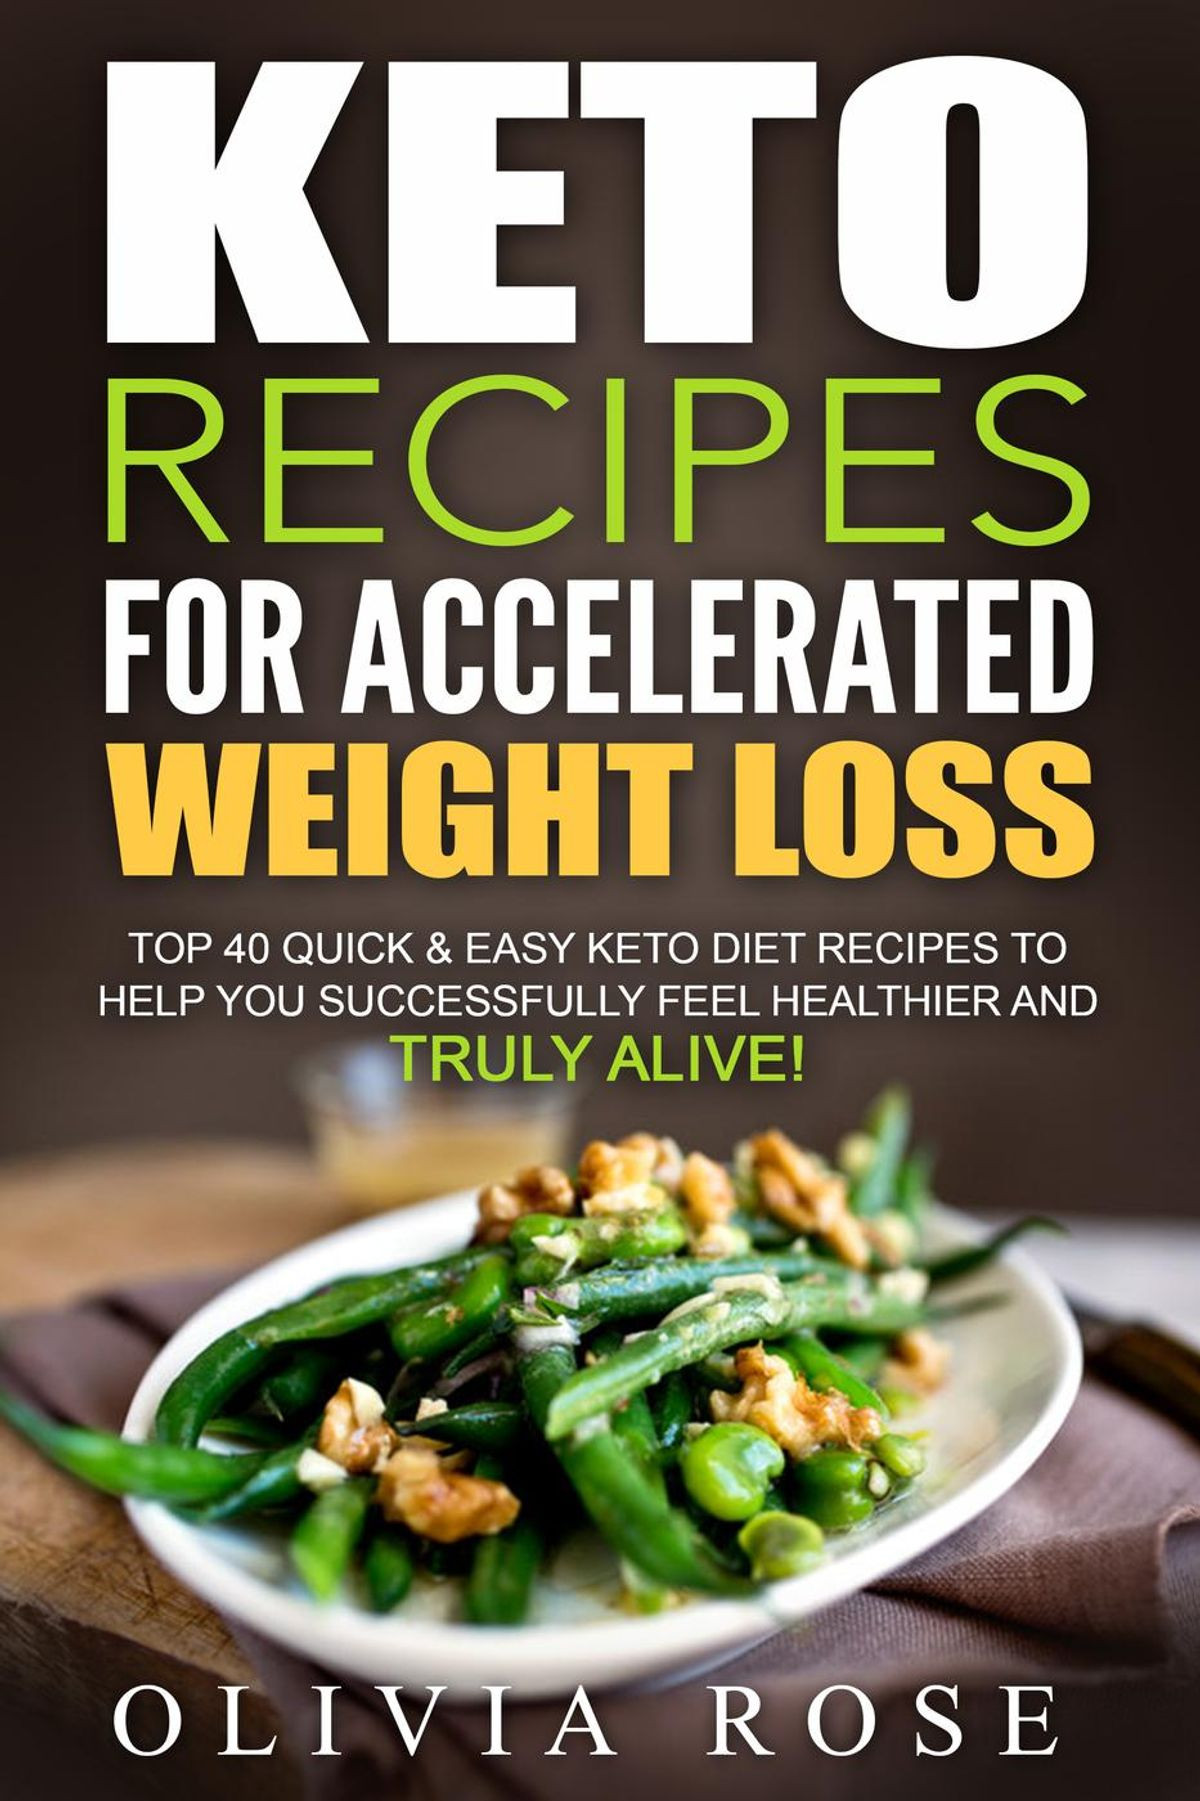 Quick Weight Loss Keto
 Keto Recipes for Accelerated Weight Loss Top 40 Quick